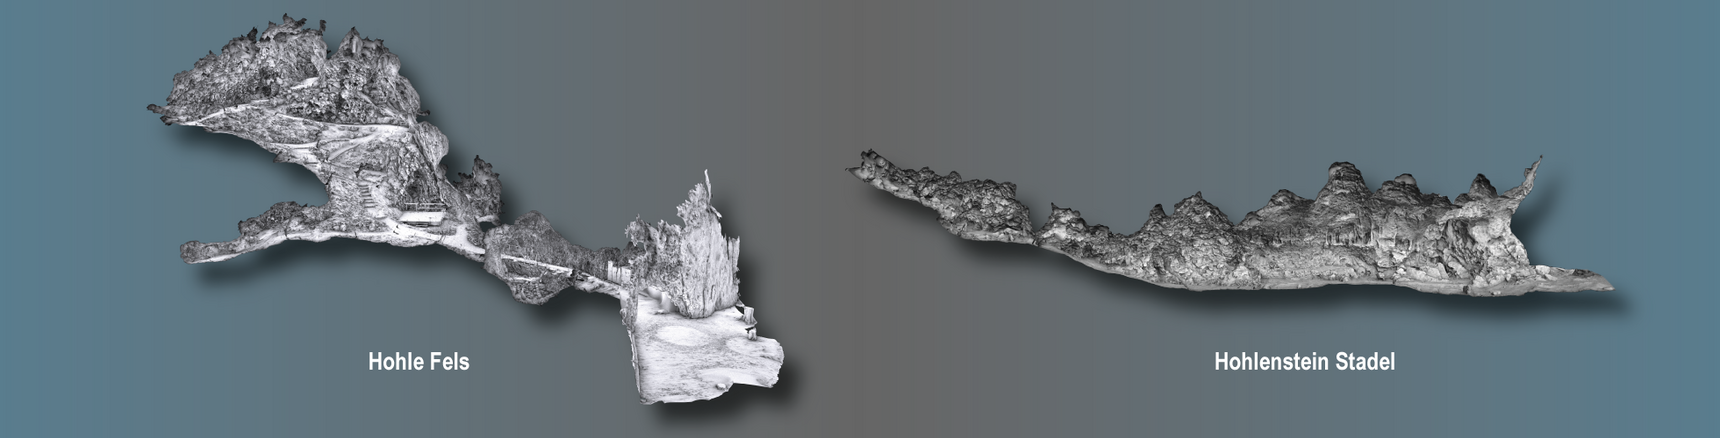 3D-Models offer virtual views to the inside of caves. These illustrations show the Hohle Fels (left) and the Hohlenstein Stadel Cave (right).